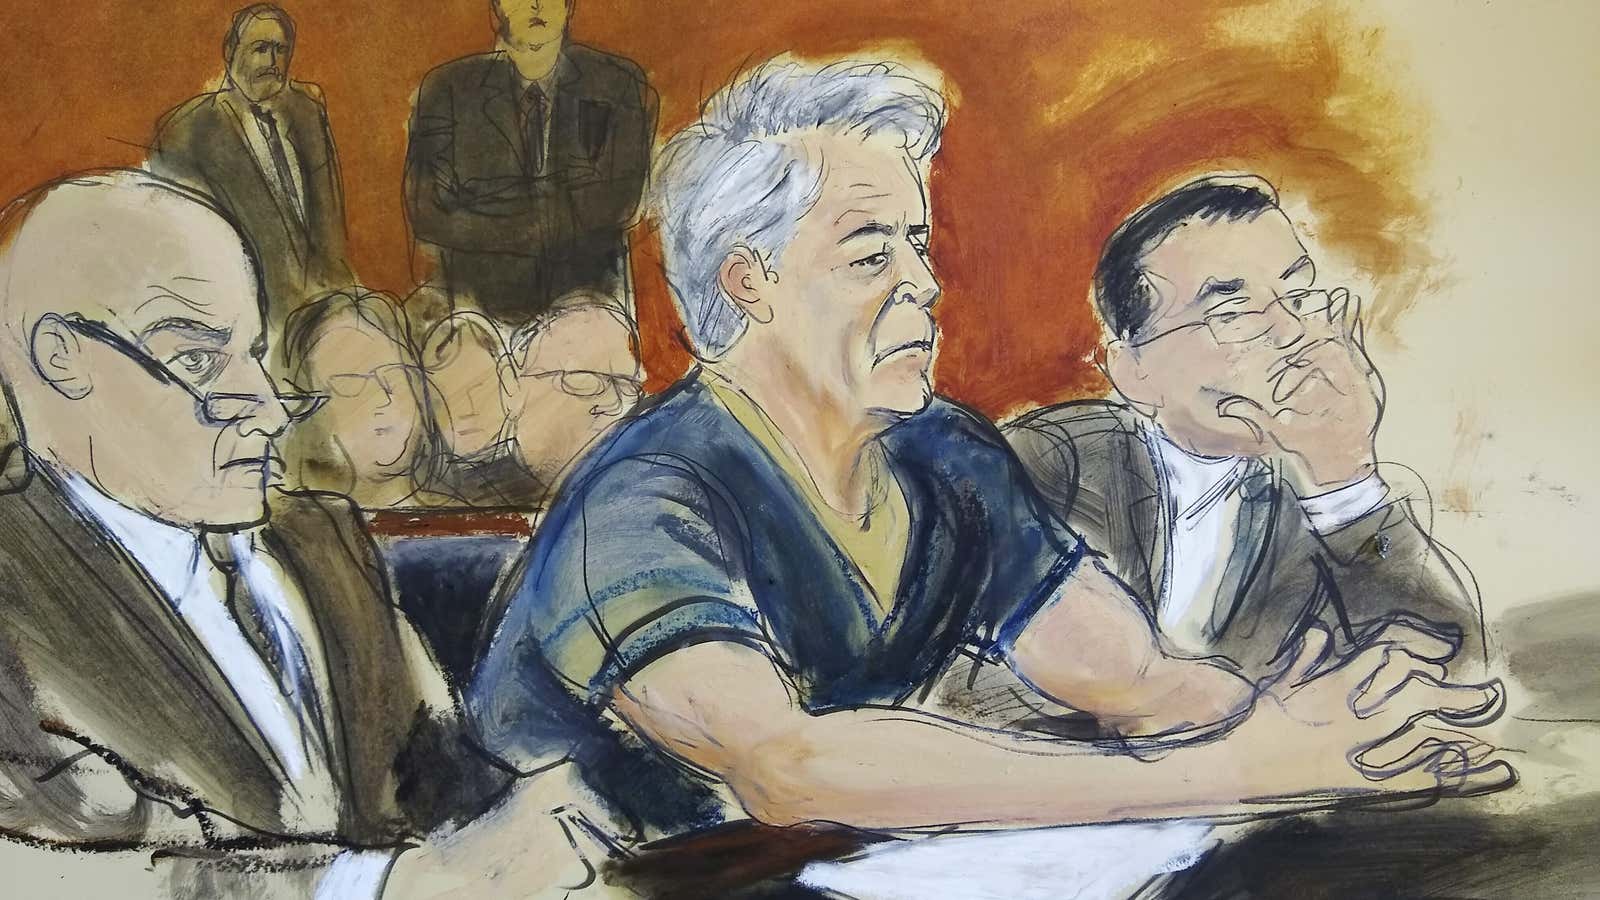 Epstein built his hedge fund off of the Towers Financial Ponzi scheme, filings allege.